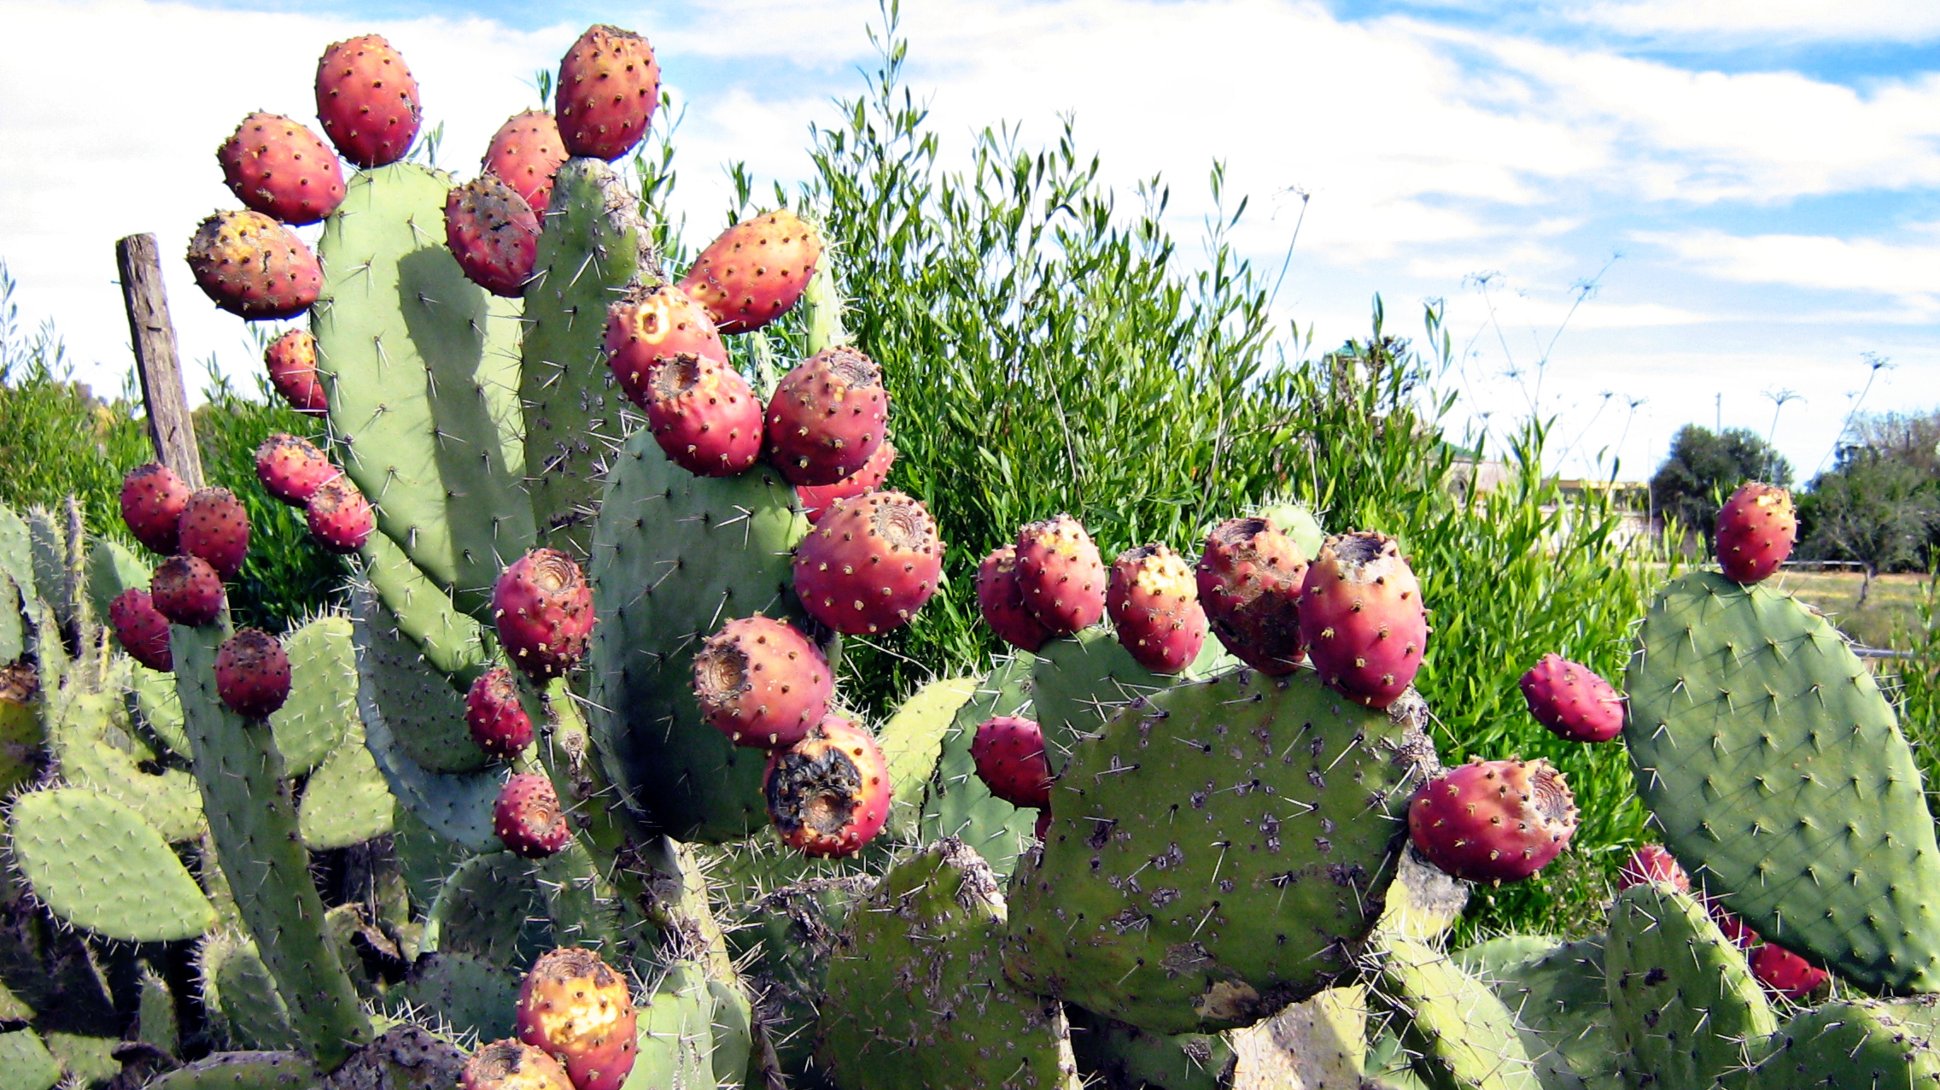 Pale red fruits grow on rounded light green cactus paddles